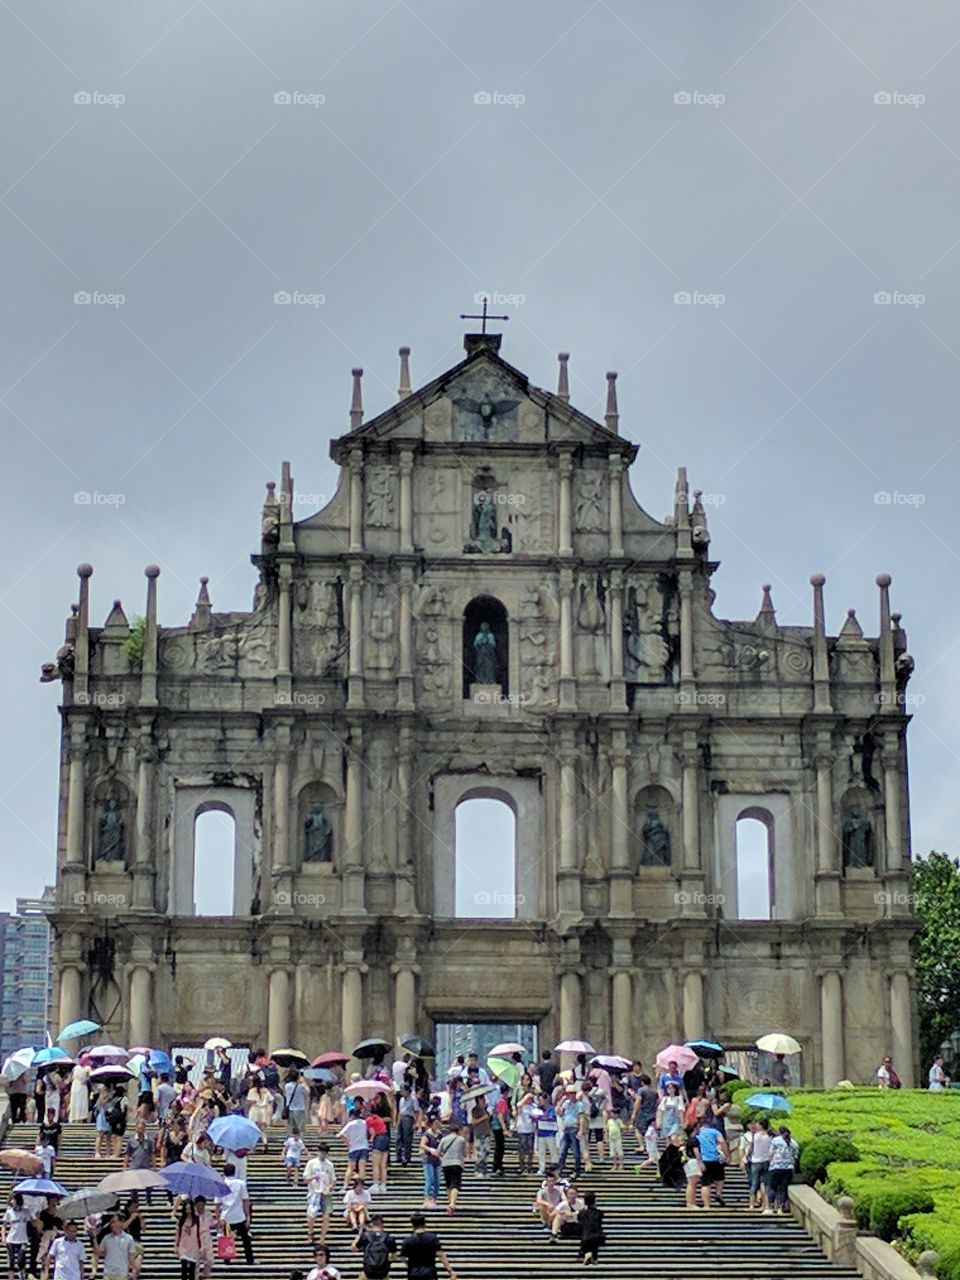 The Ruins of St. Paul. The ancient cathedral of St. Paul in Macau.